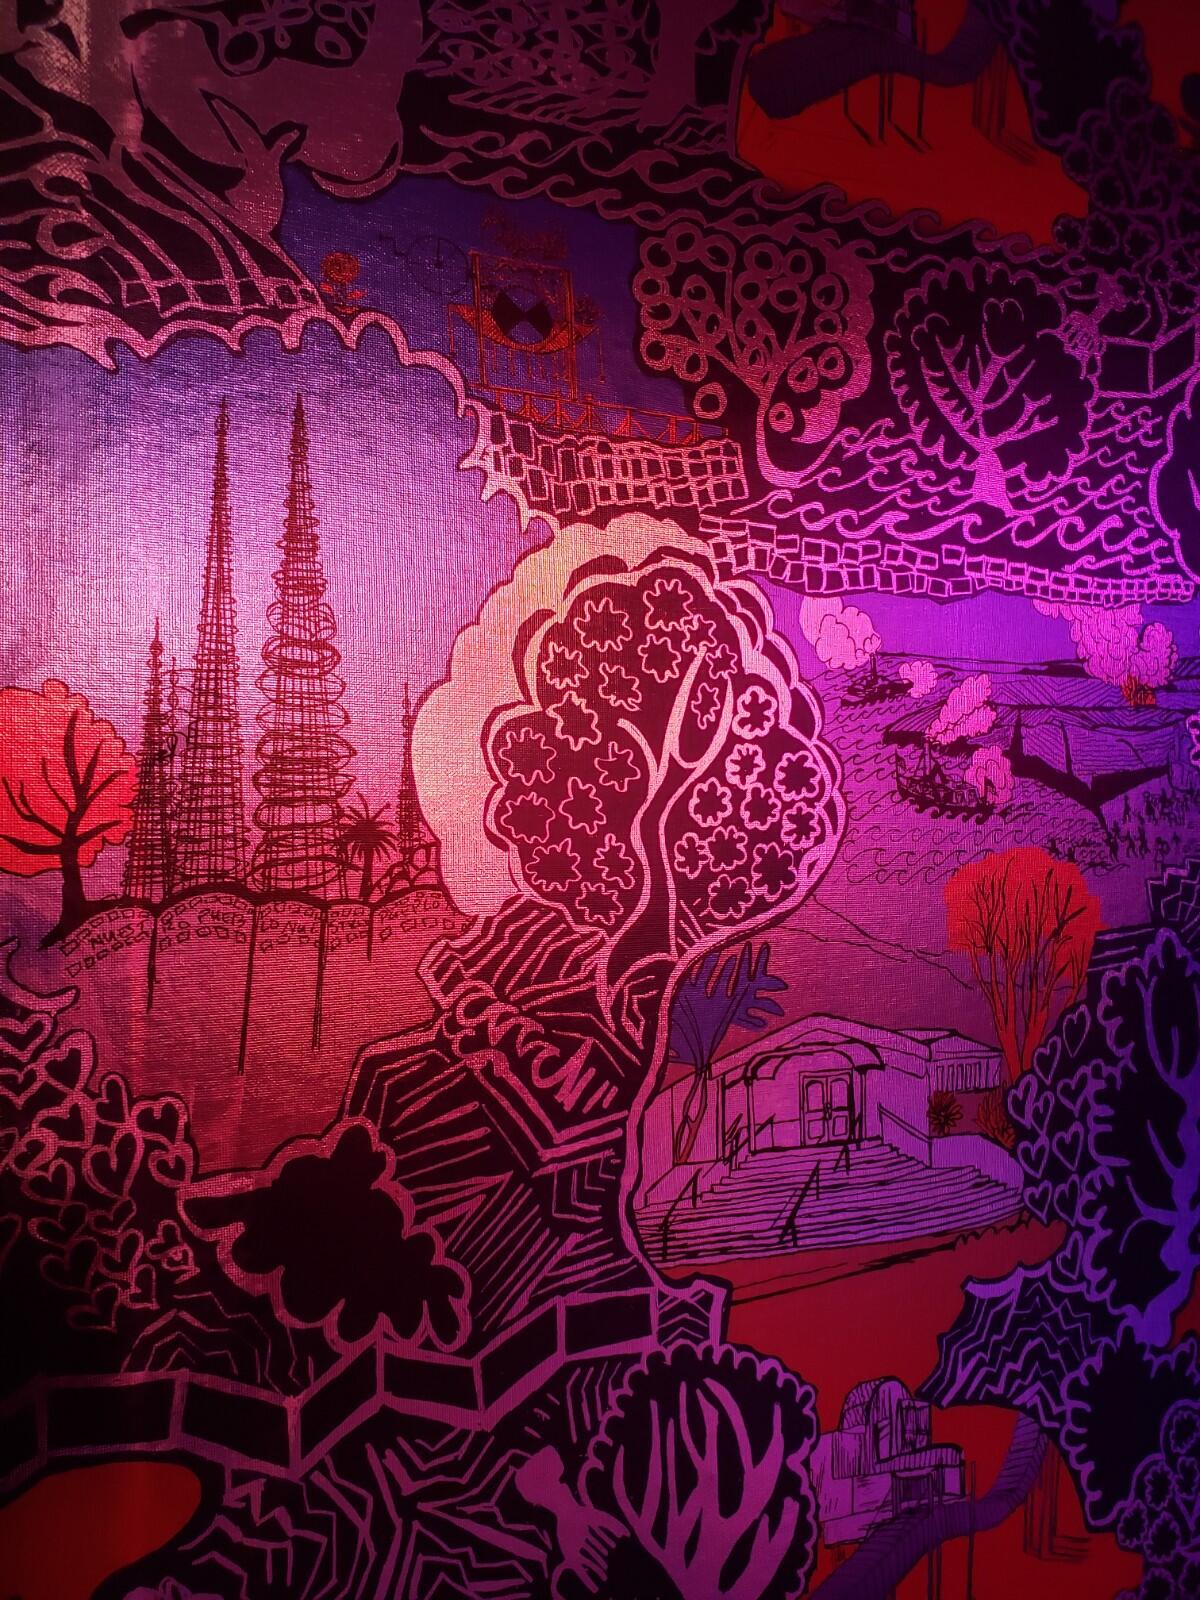 A detail of Cauleen Smith's wallpaper shows the Watts Towers.